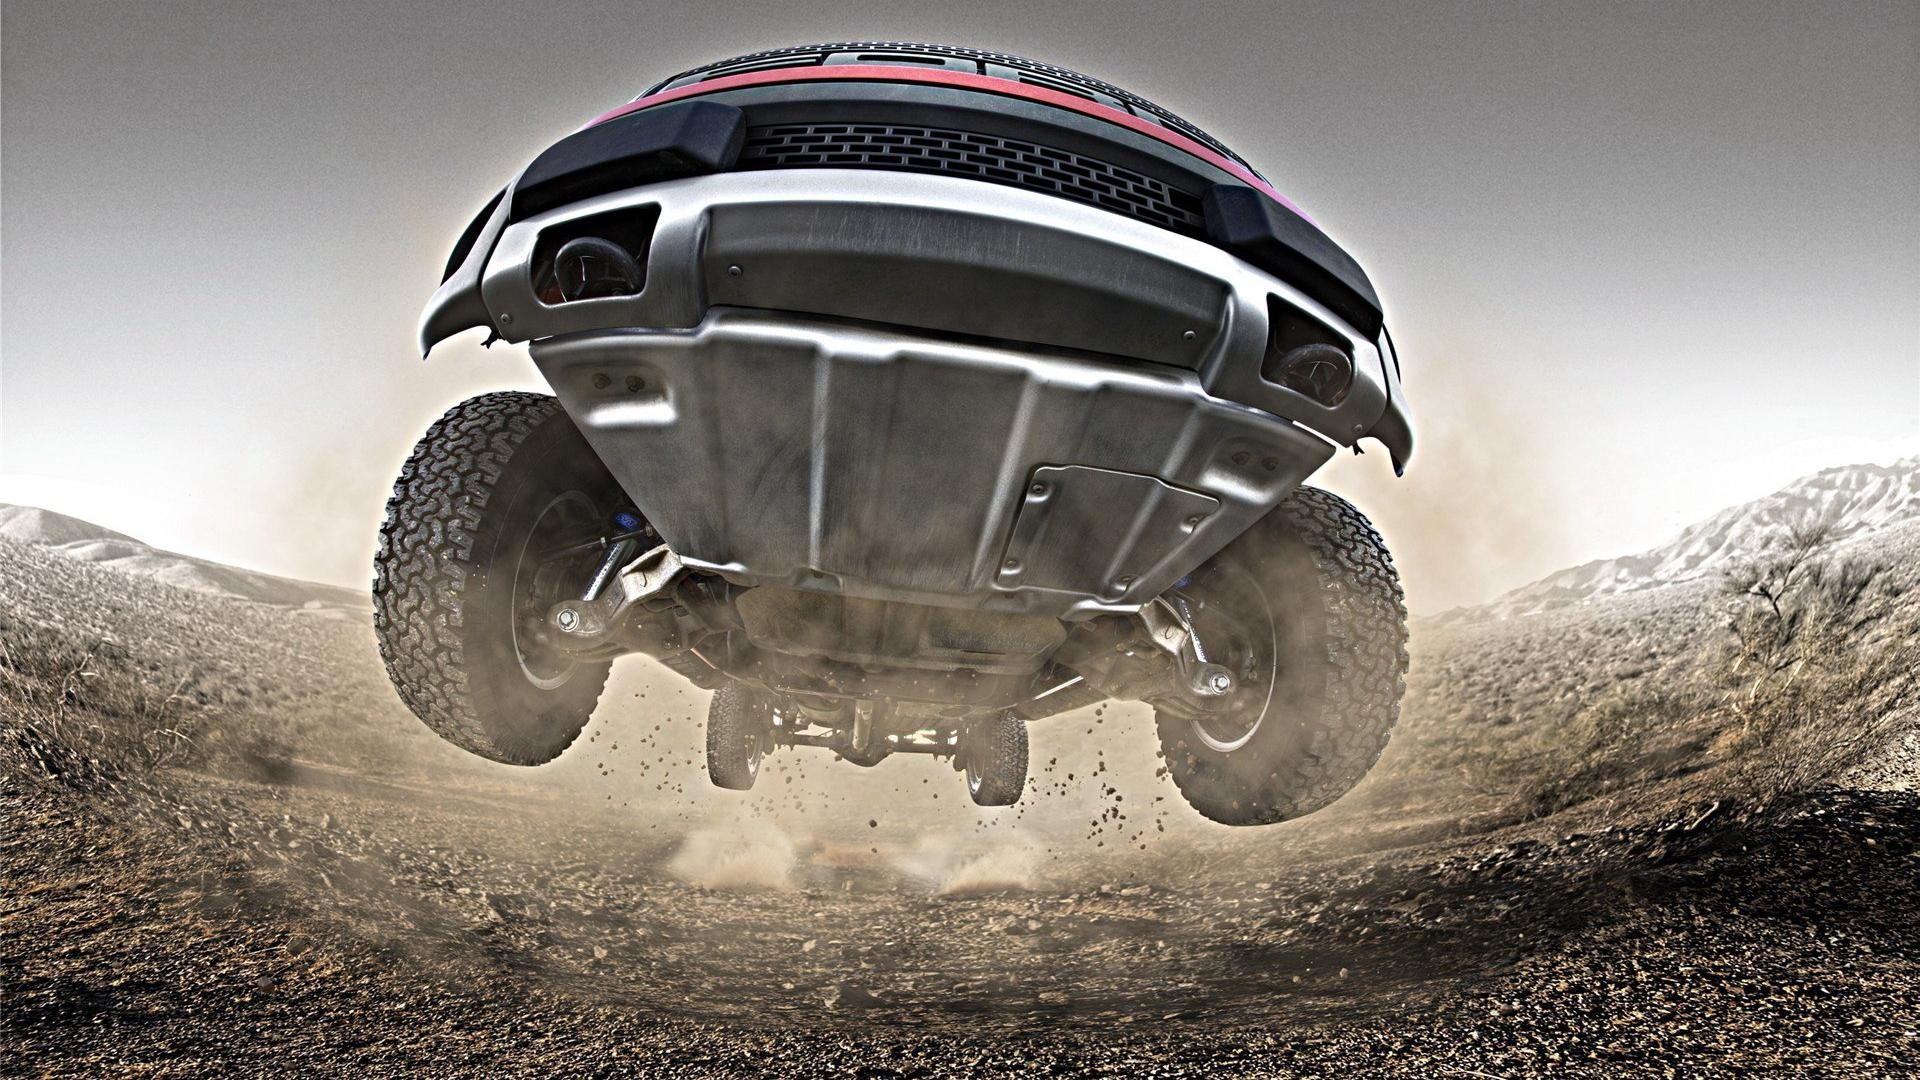 1920x1080 Learn Extreme Driving 101 At Ford's New Raptor Assault School For Truck  Owners